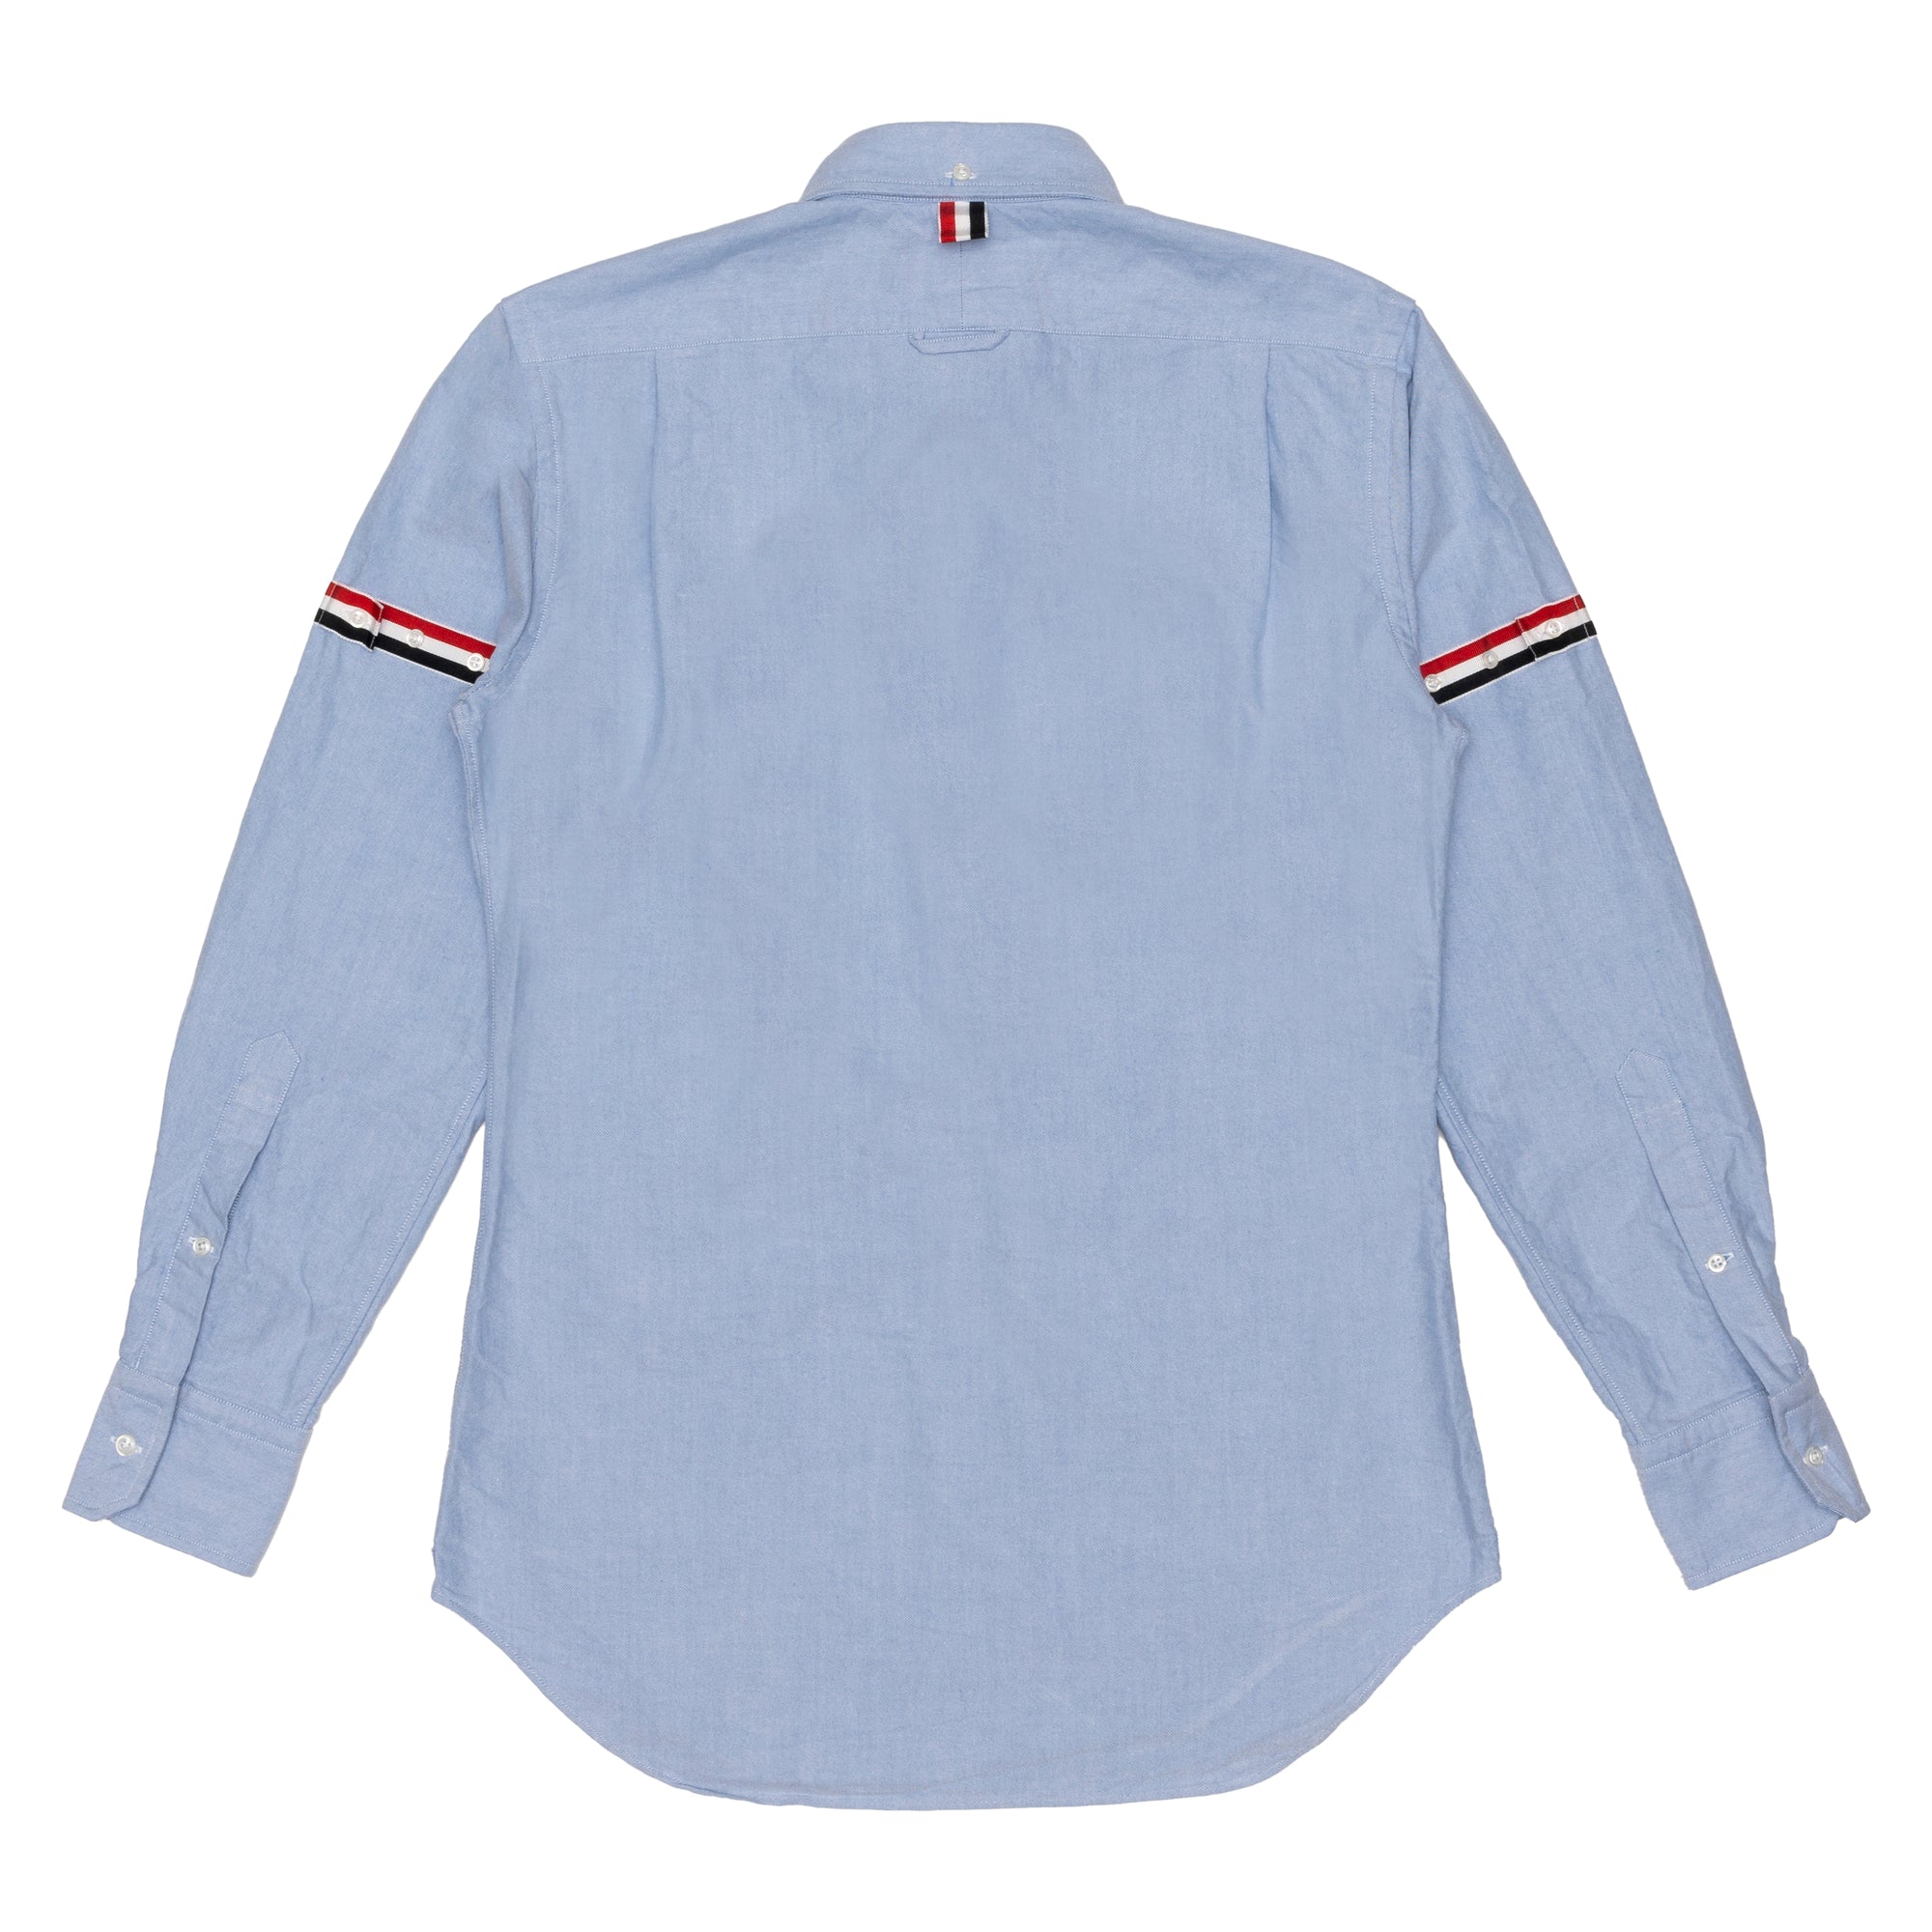 THOM BROWNE - MENS CLASSIC LONG SLEEVE BUTTON DOW - LIGHT BLUE - (MWL150E-06177) view 2